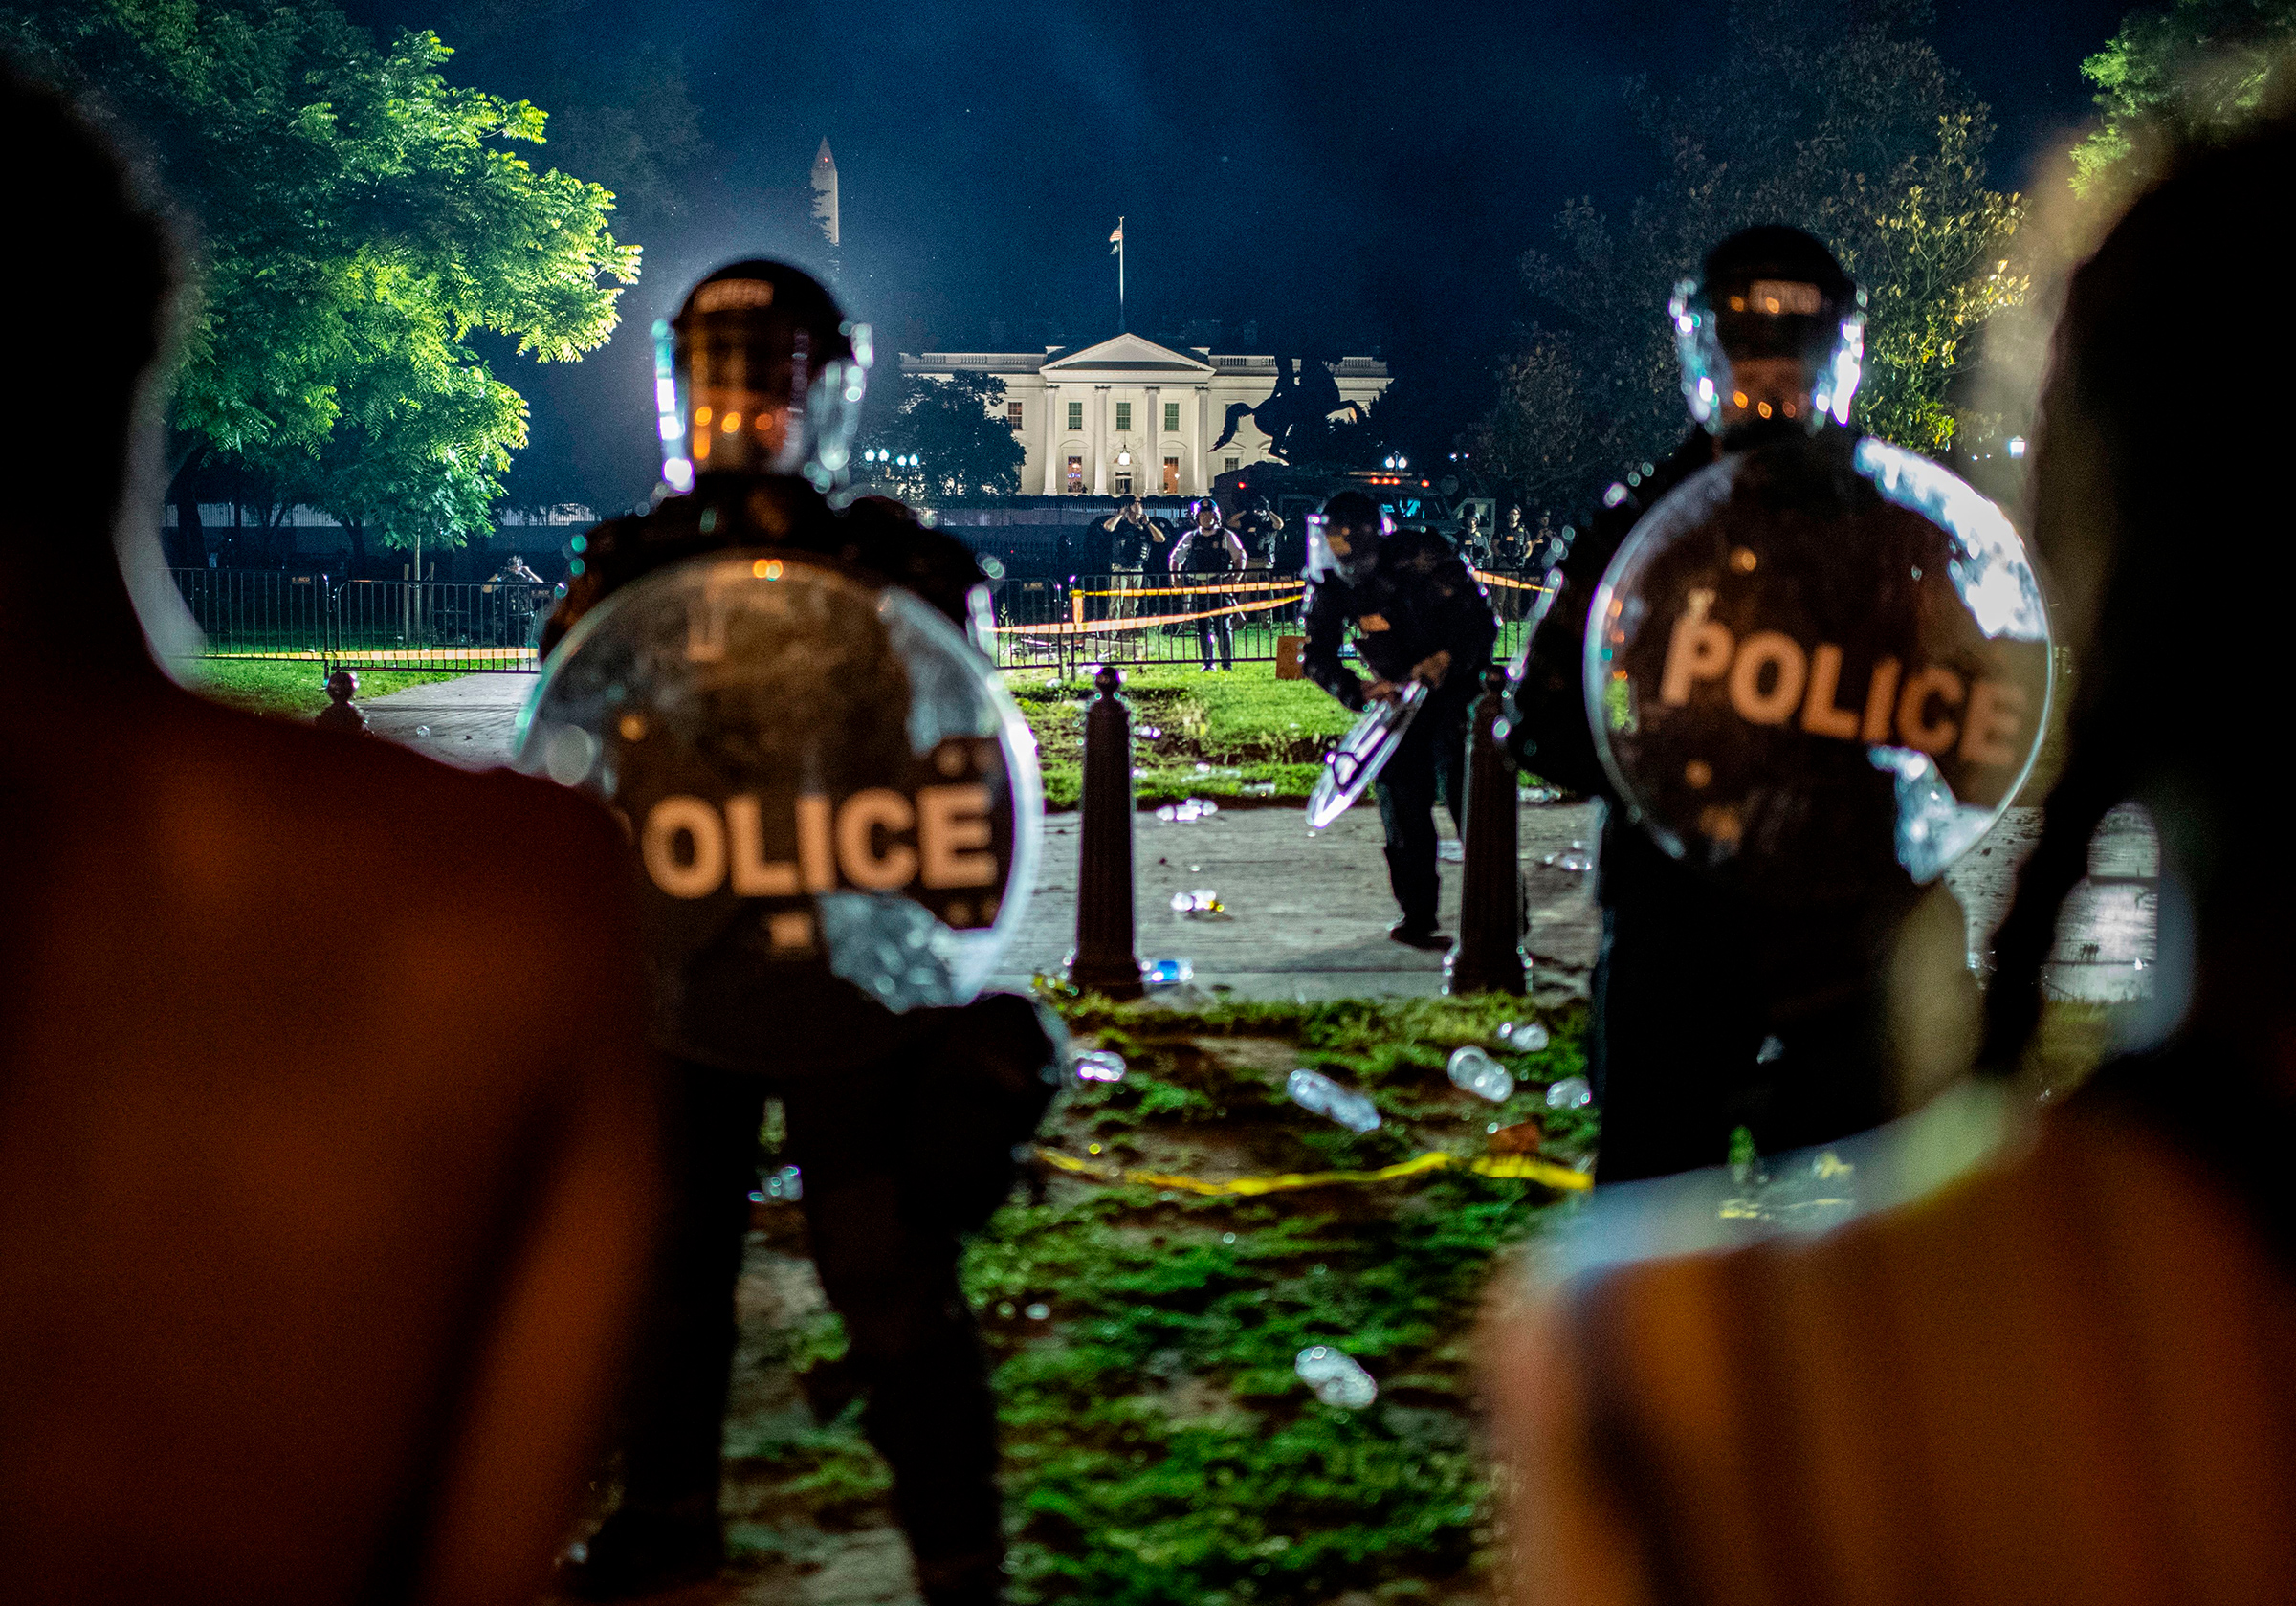 Demonstrators confront U.S. Secret Service and Park Police officers outside the White House in Washington, D.C., on May 30, 2020. (Eric Baradat—AFP/Getty Images)